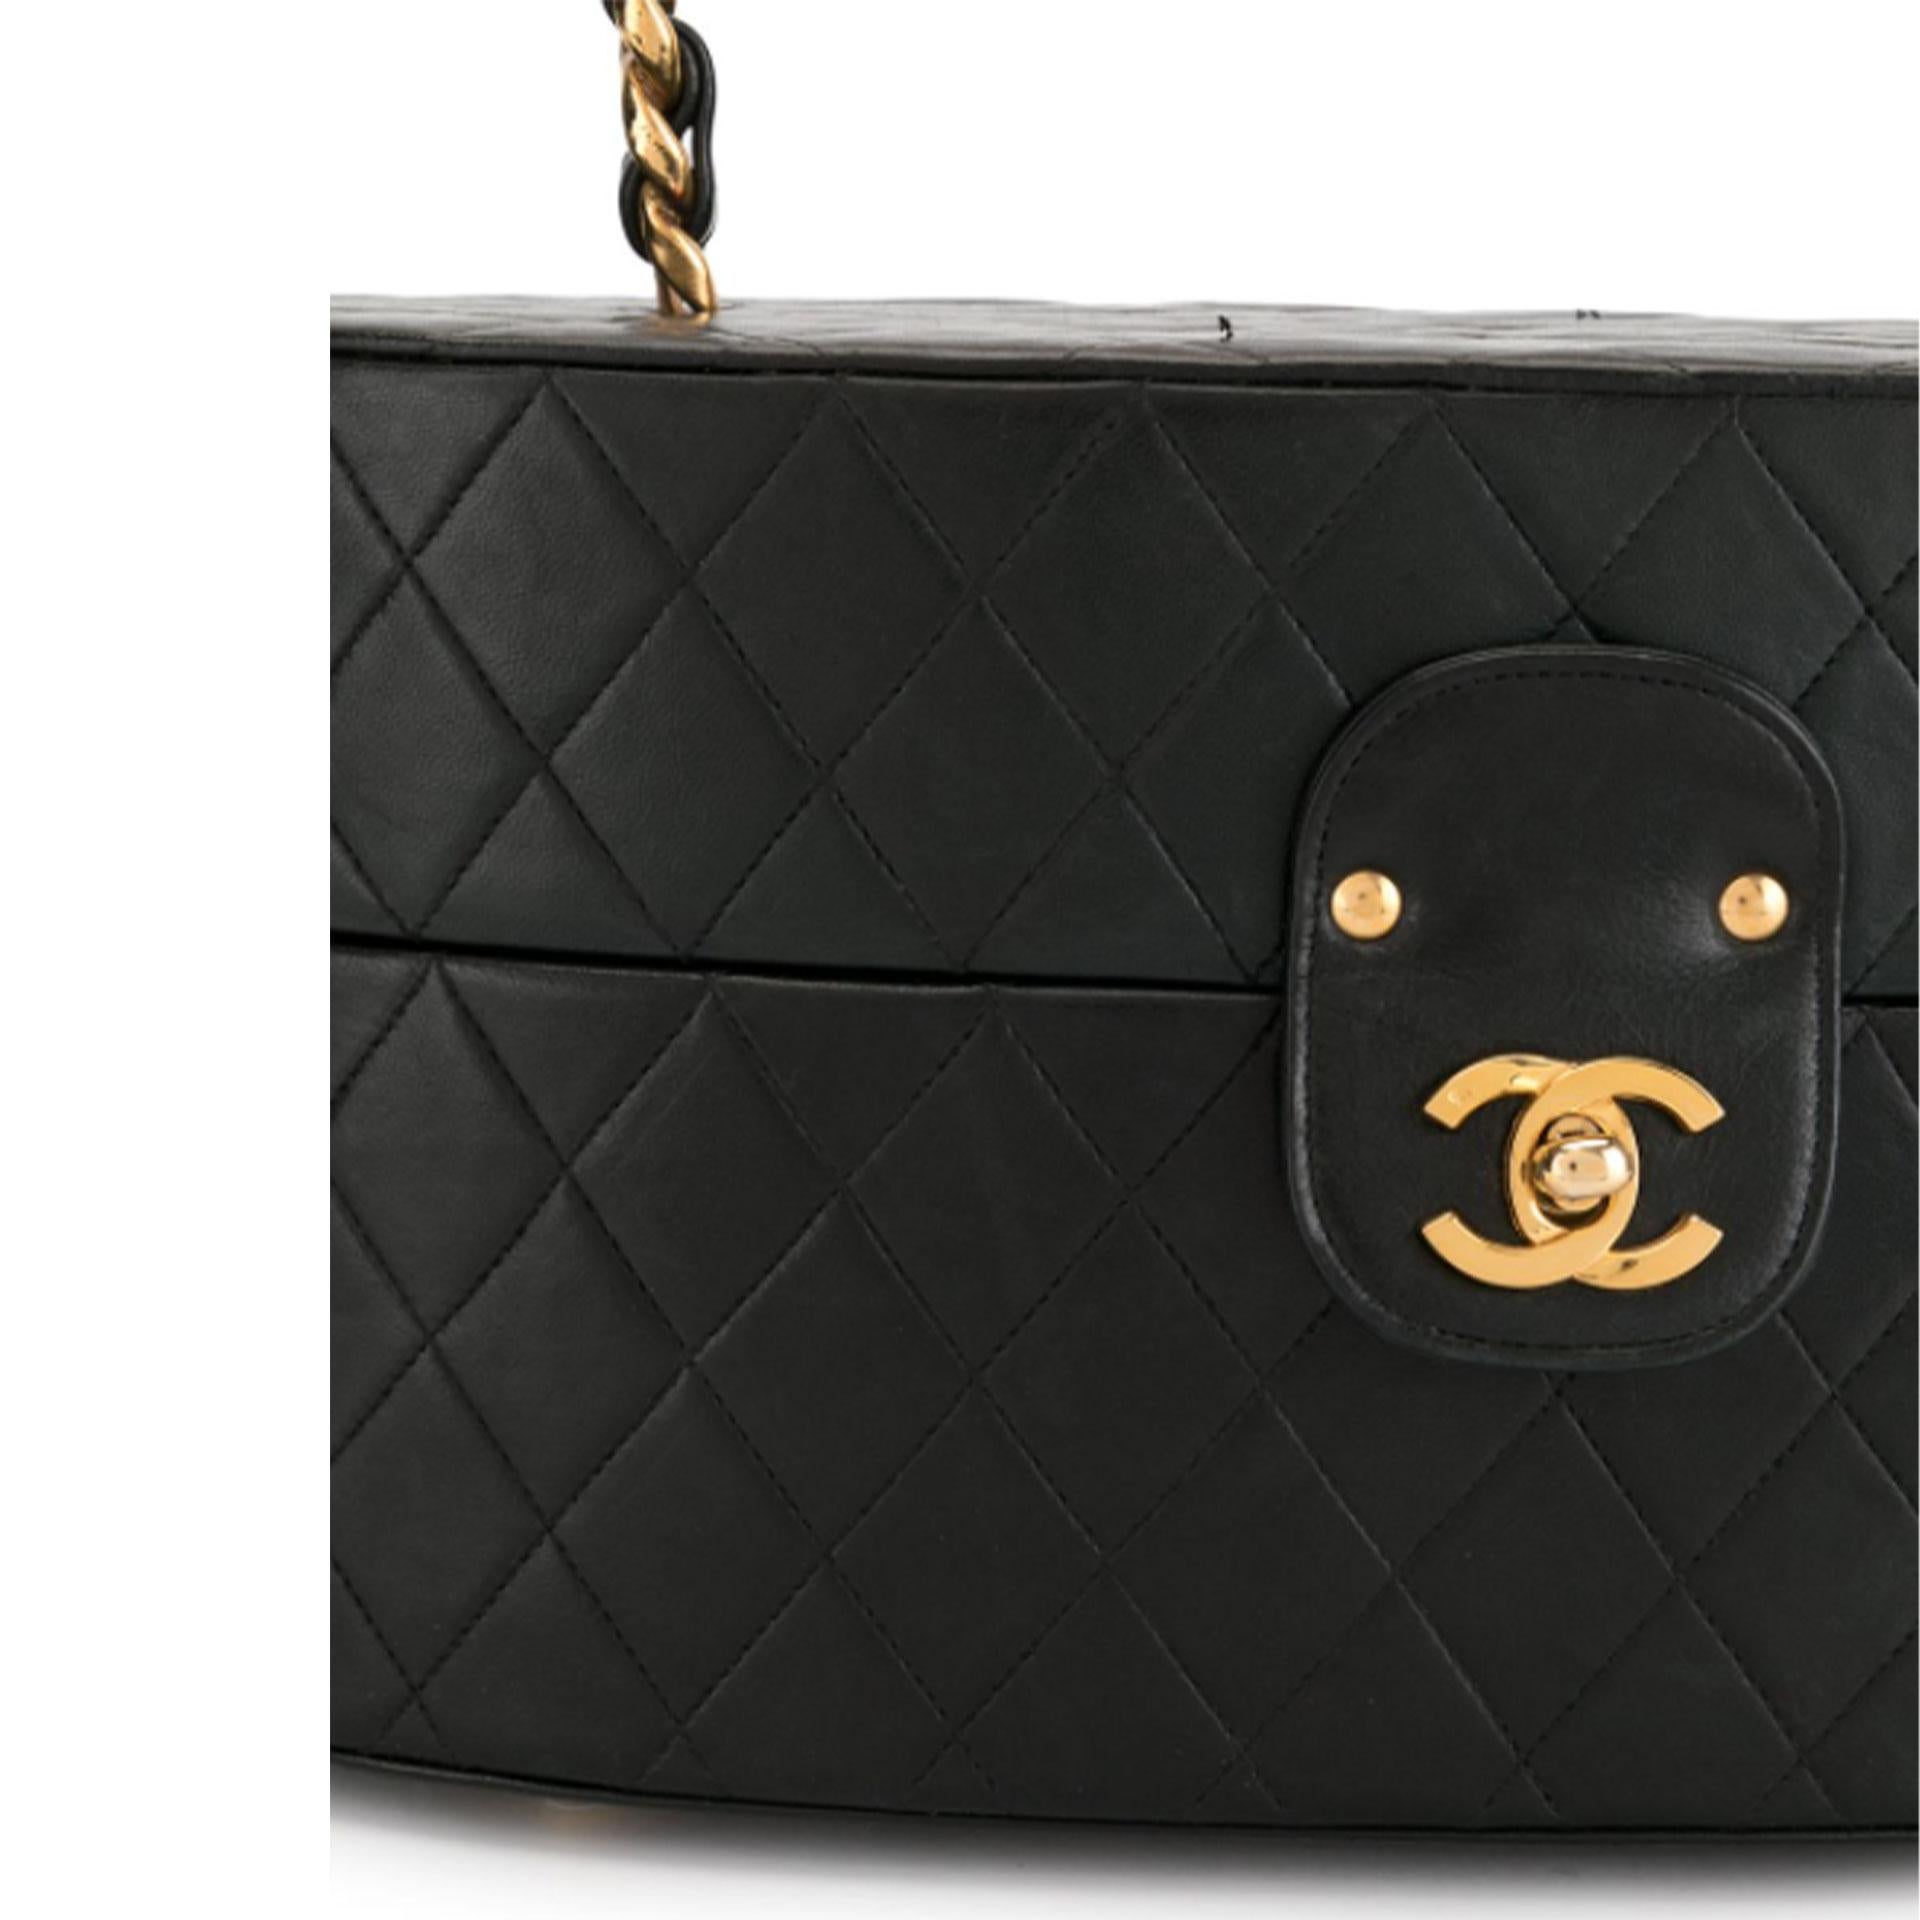 Chanel Vintage 1988 Quilted Black Lambskin Train Case Leather Home Decor Trunk In Good Condition For Sale In Miami, FL